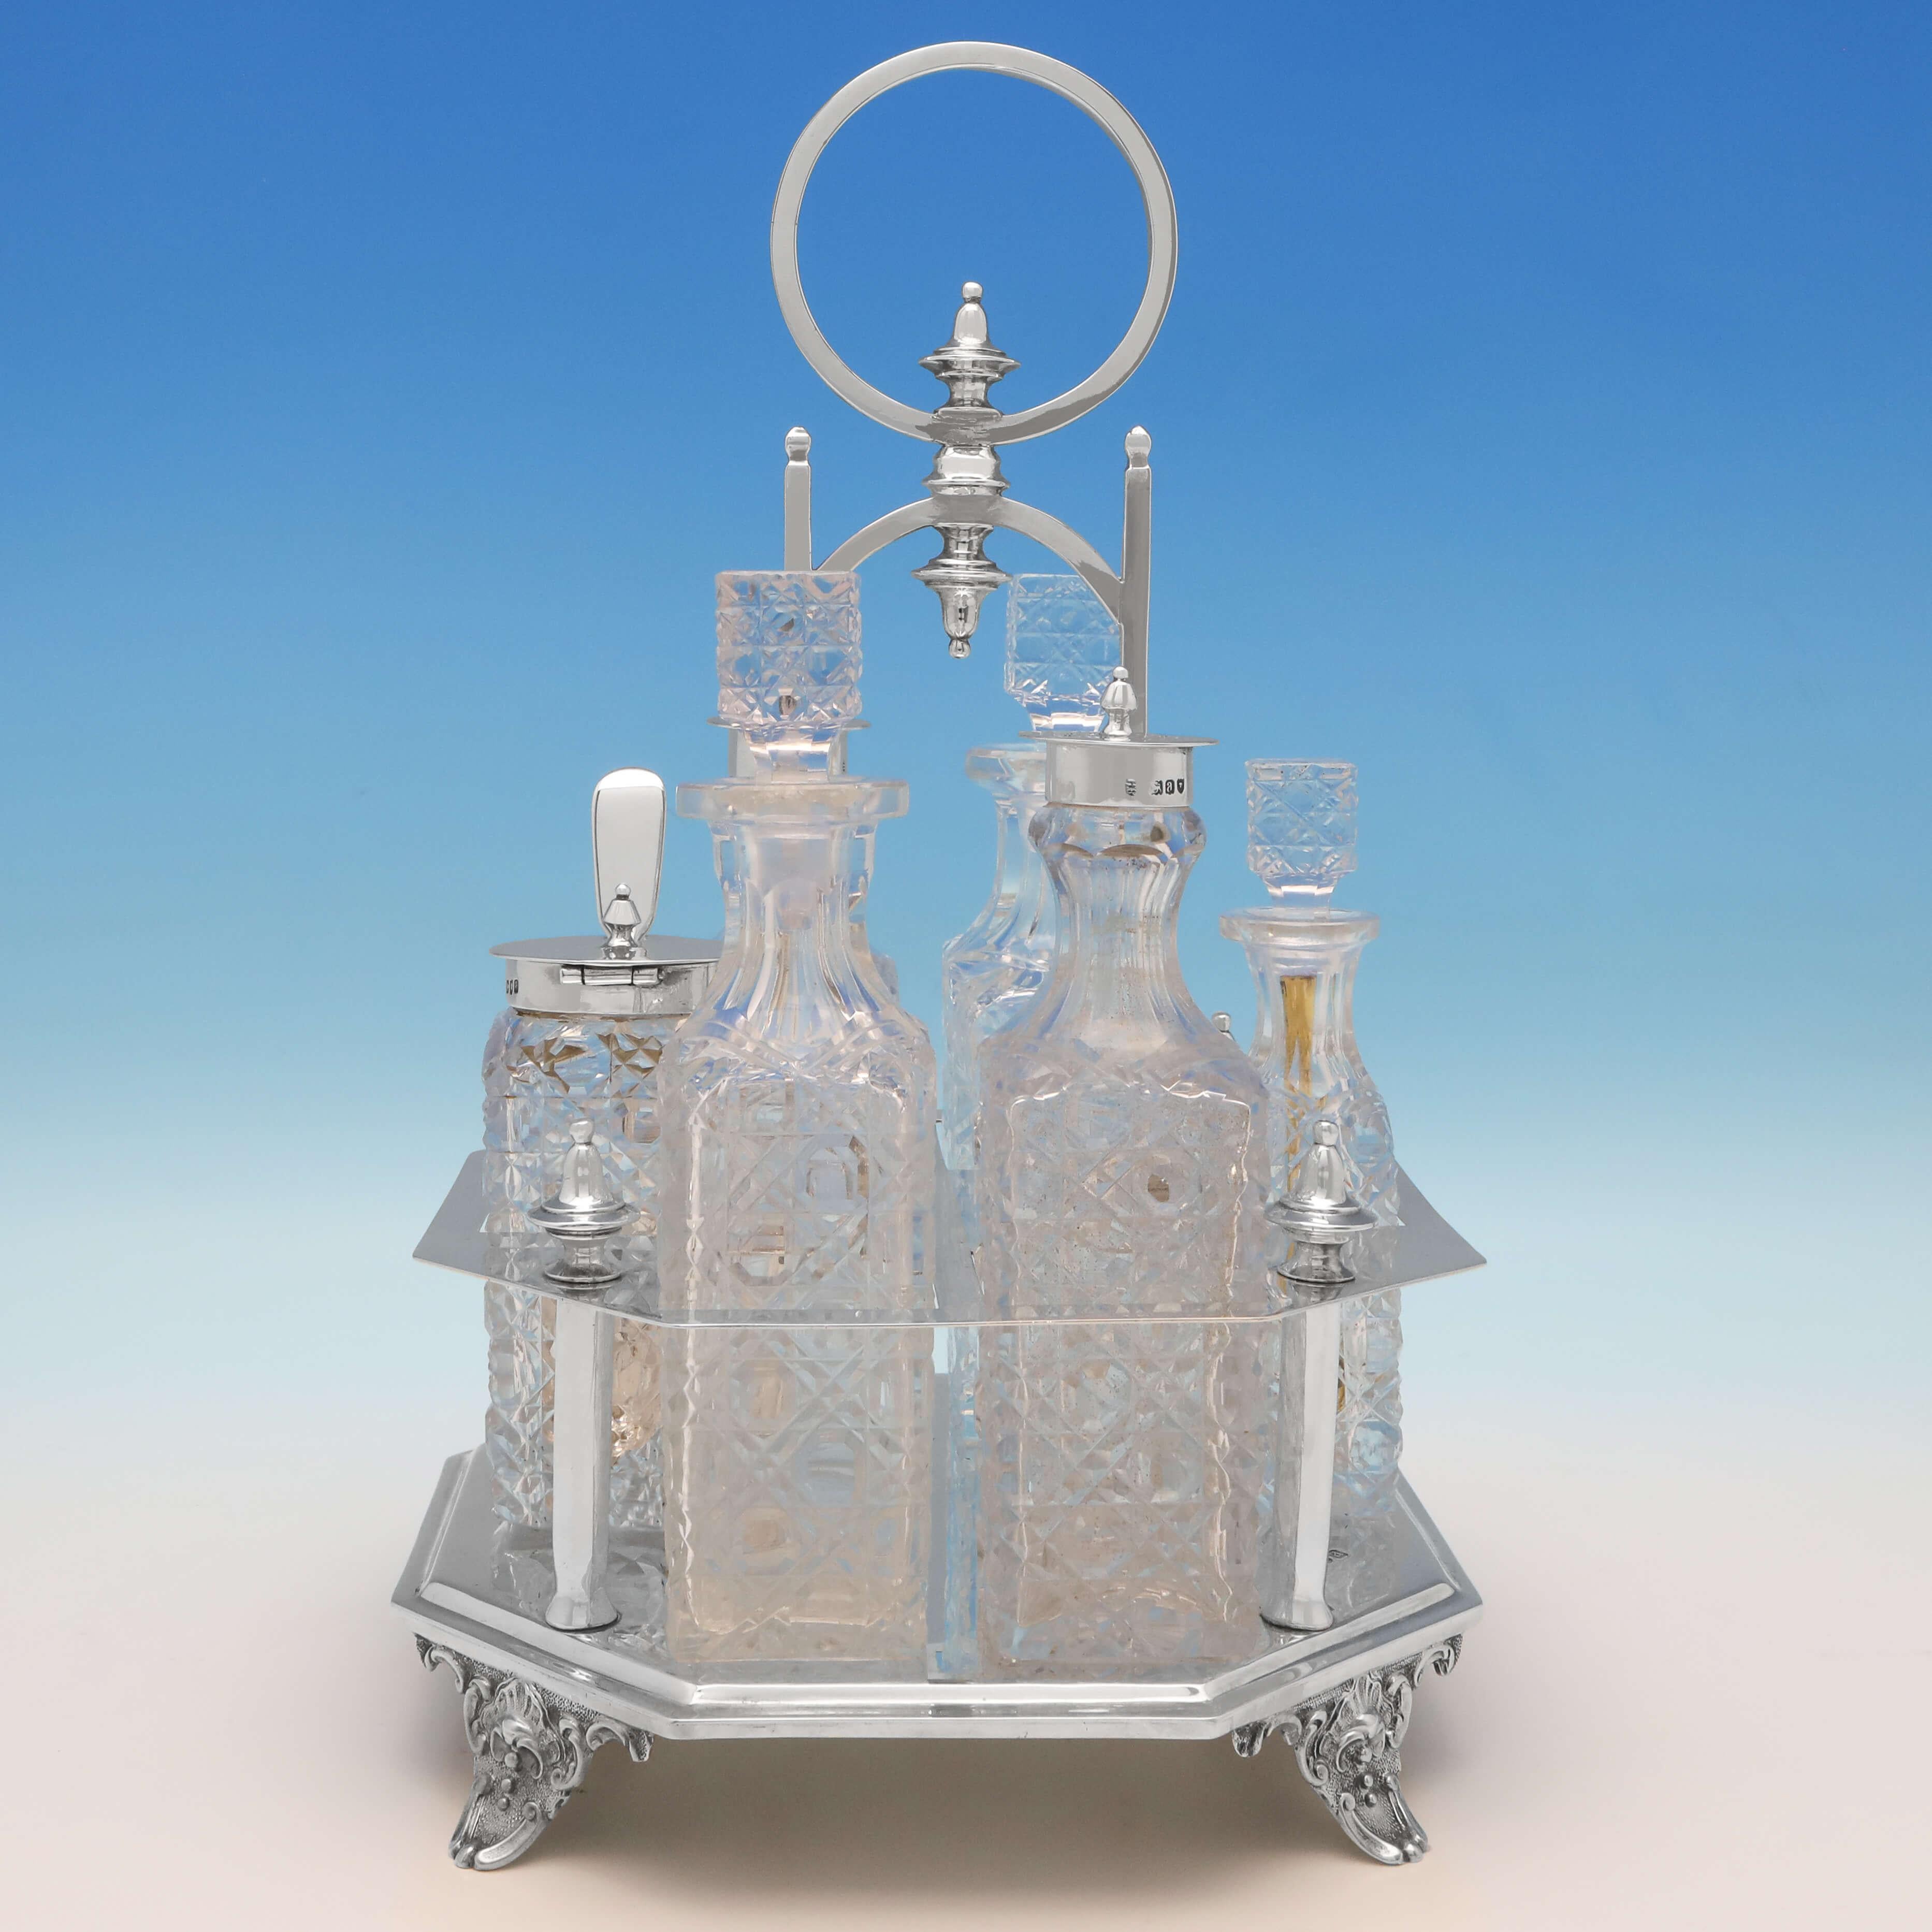 Hallmarked in London in 1896 by Charles Boyton II, this stylish, Victorian, antique sterling silver cruet set, comprises two oil bottles, two pepper pots, a cayenne pepper pot, and a mustard pot, all with hobnail cut glass, and all set in an